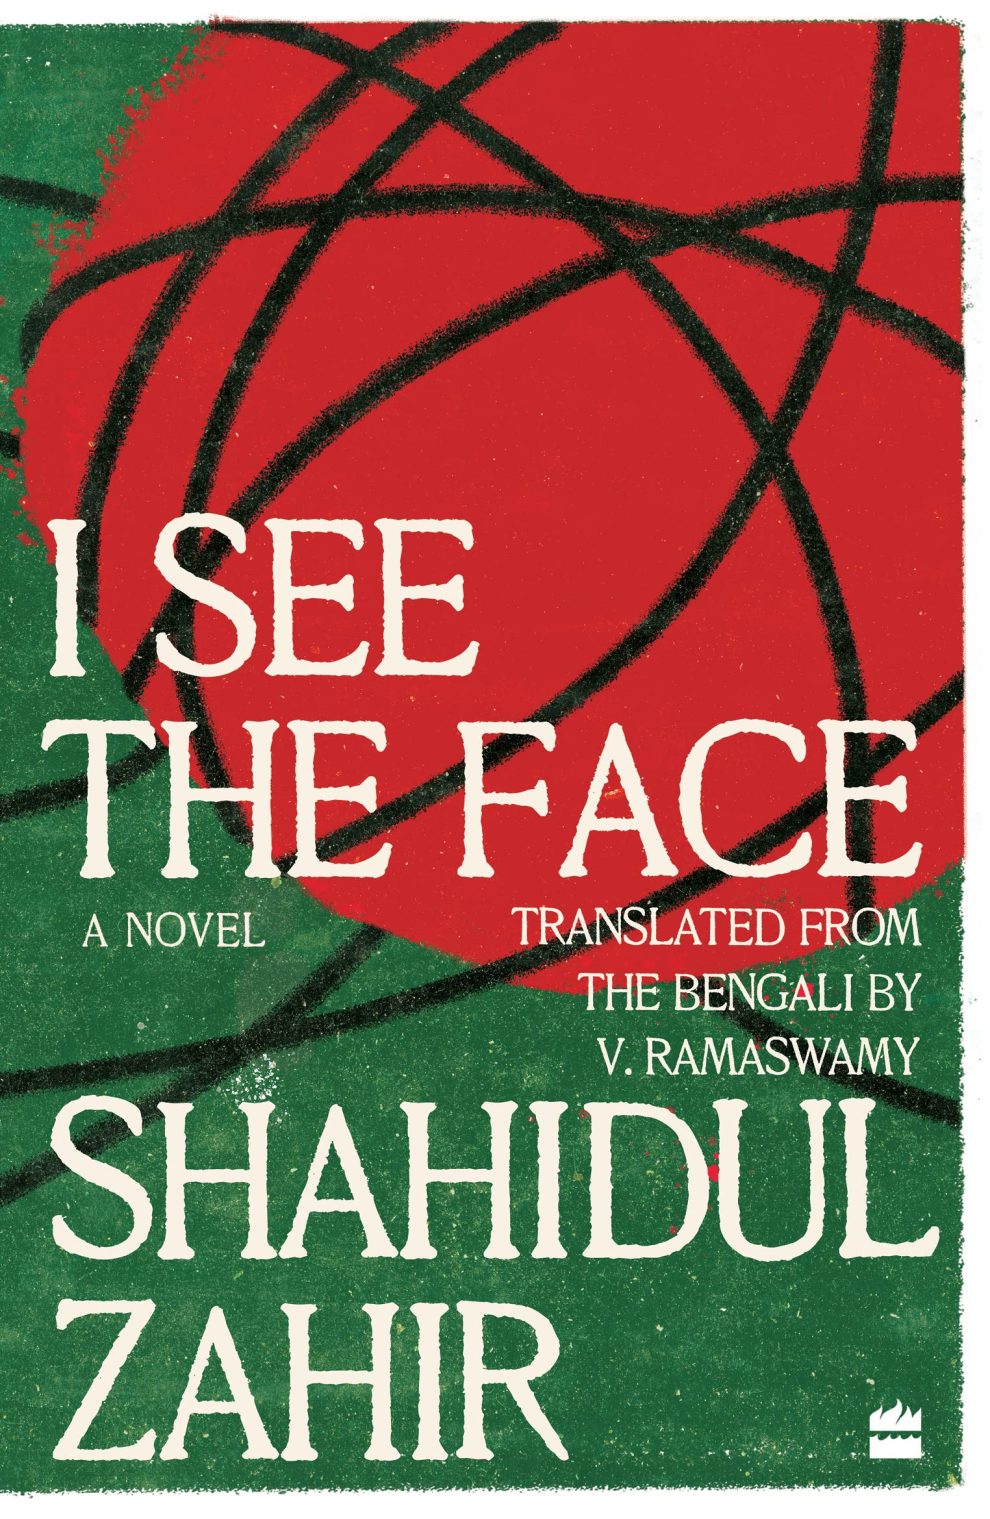 Book Review: I See The Face, an alternative history of Bangladesh, beginning with the 1971 War